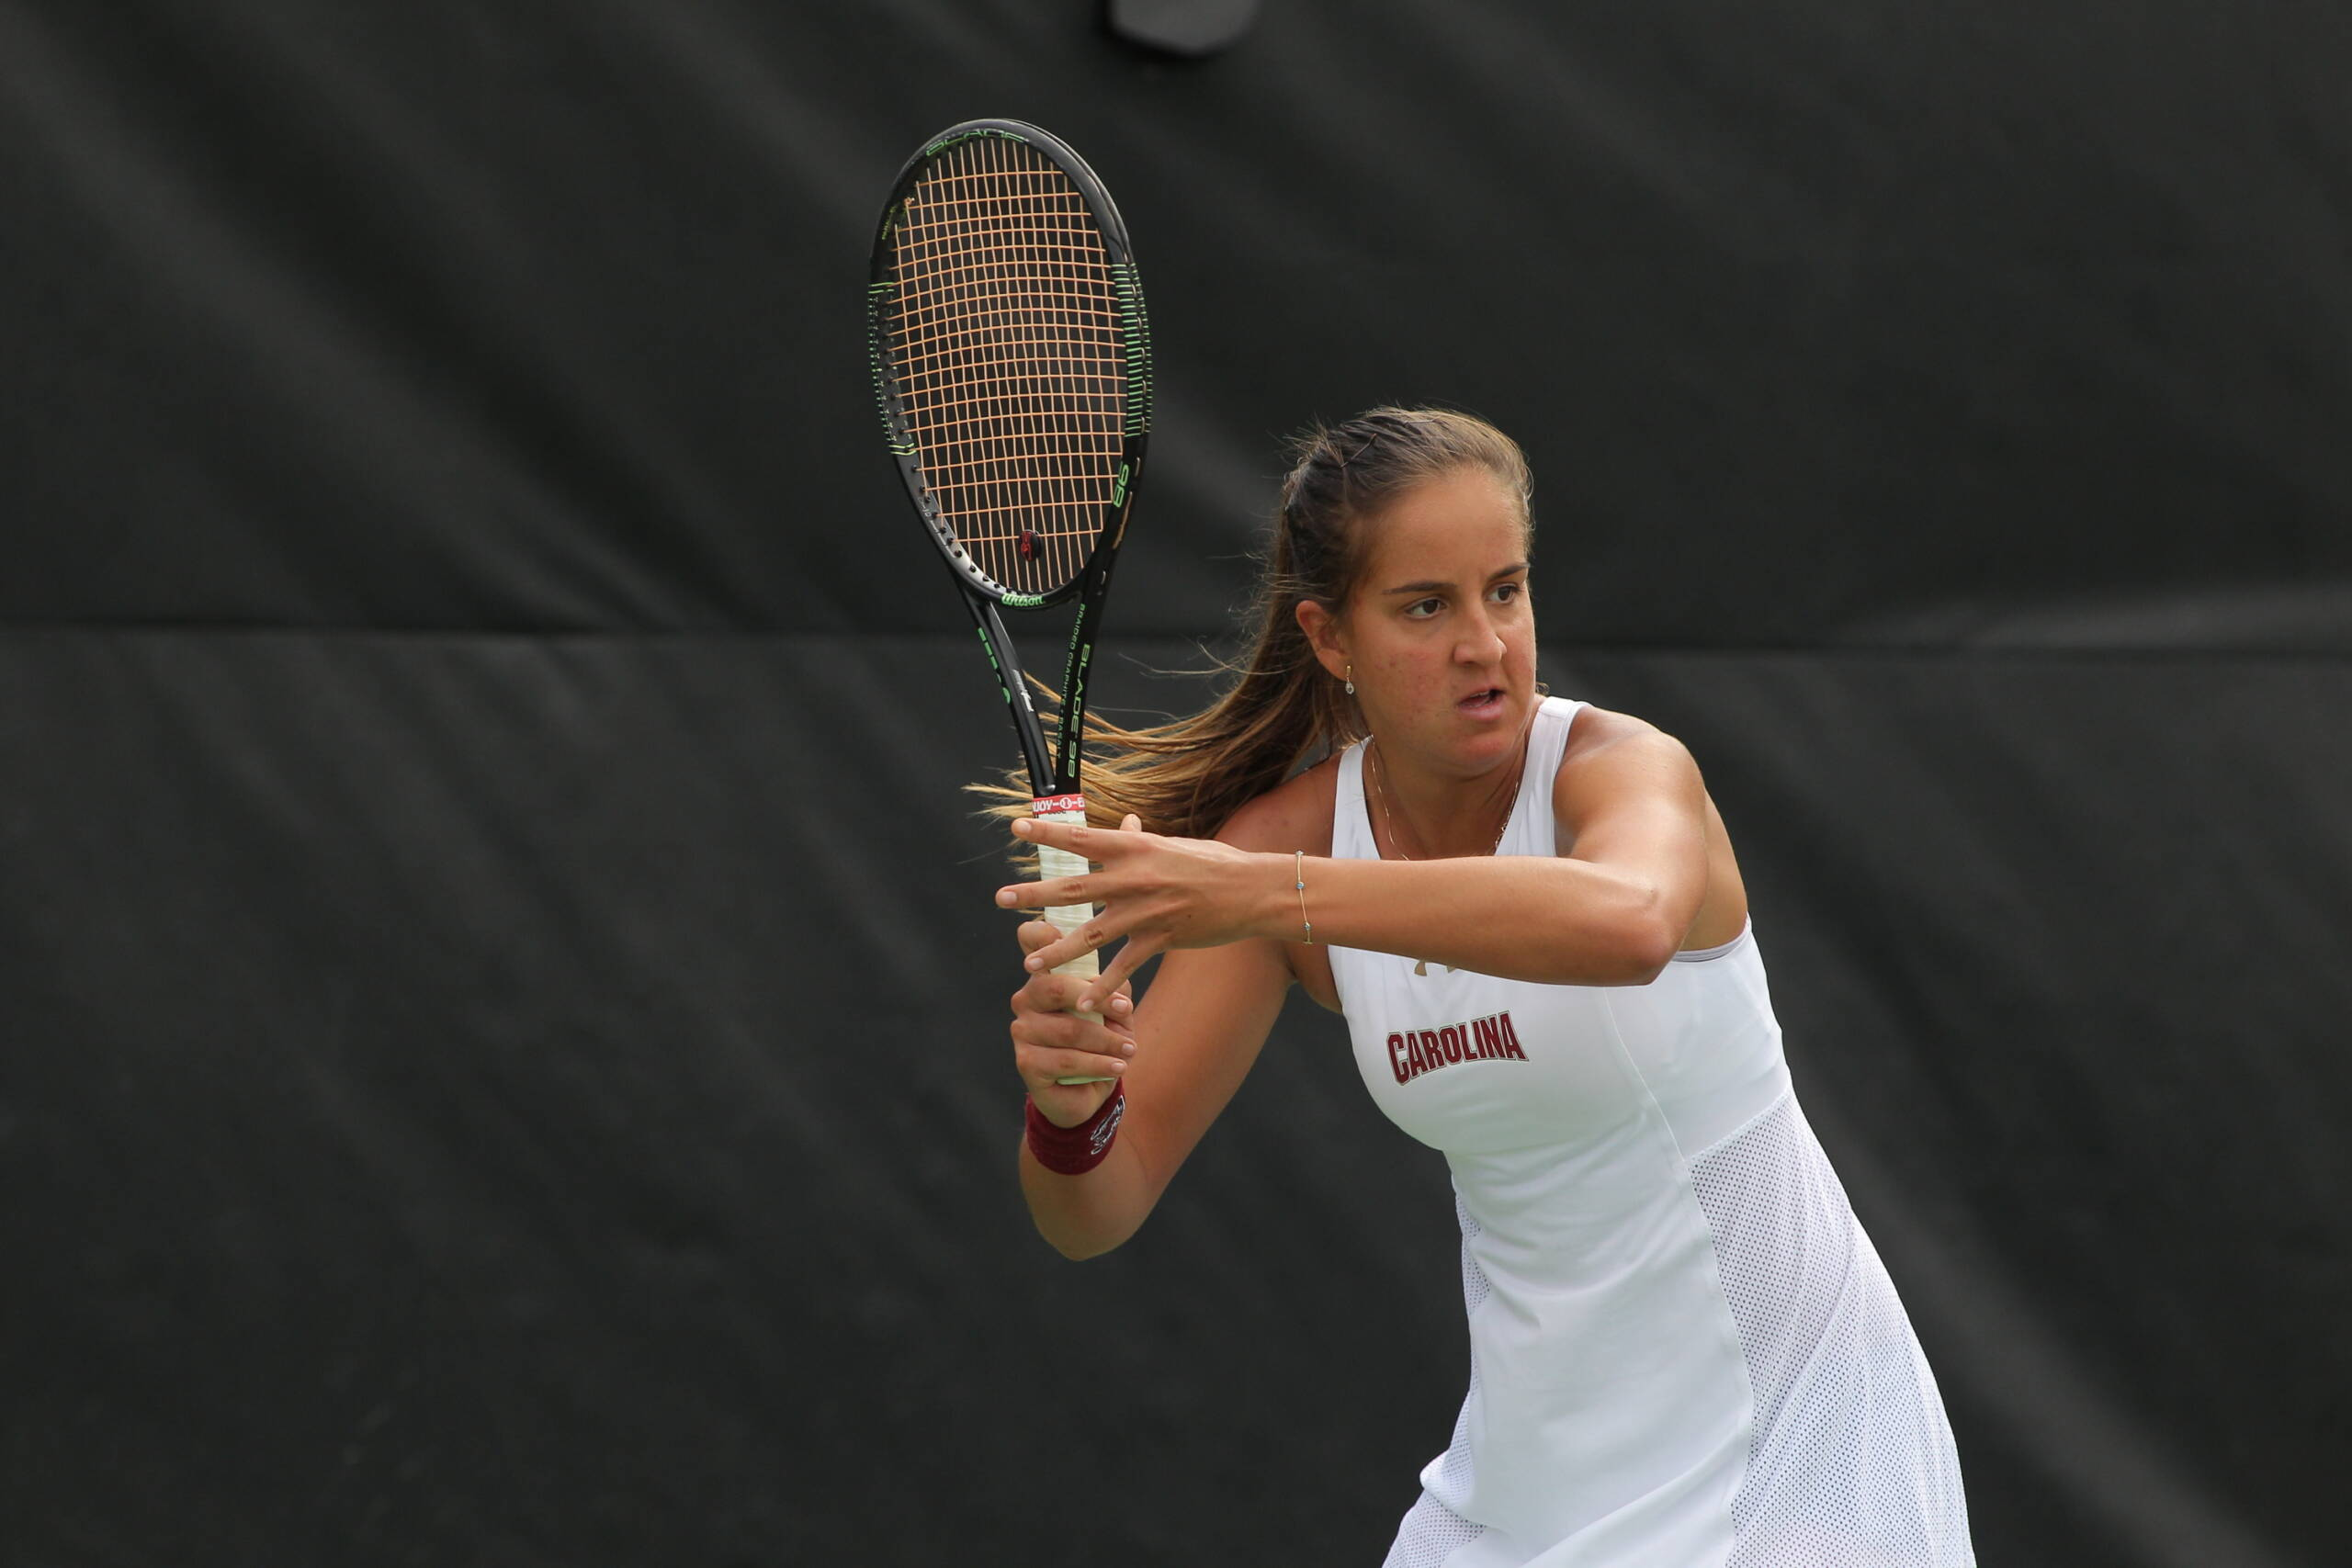 Martins Advances in Consolation Bracket at National Indoors